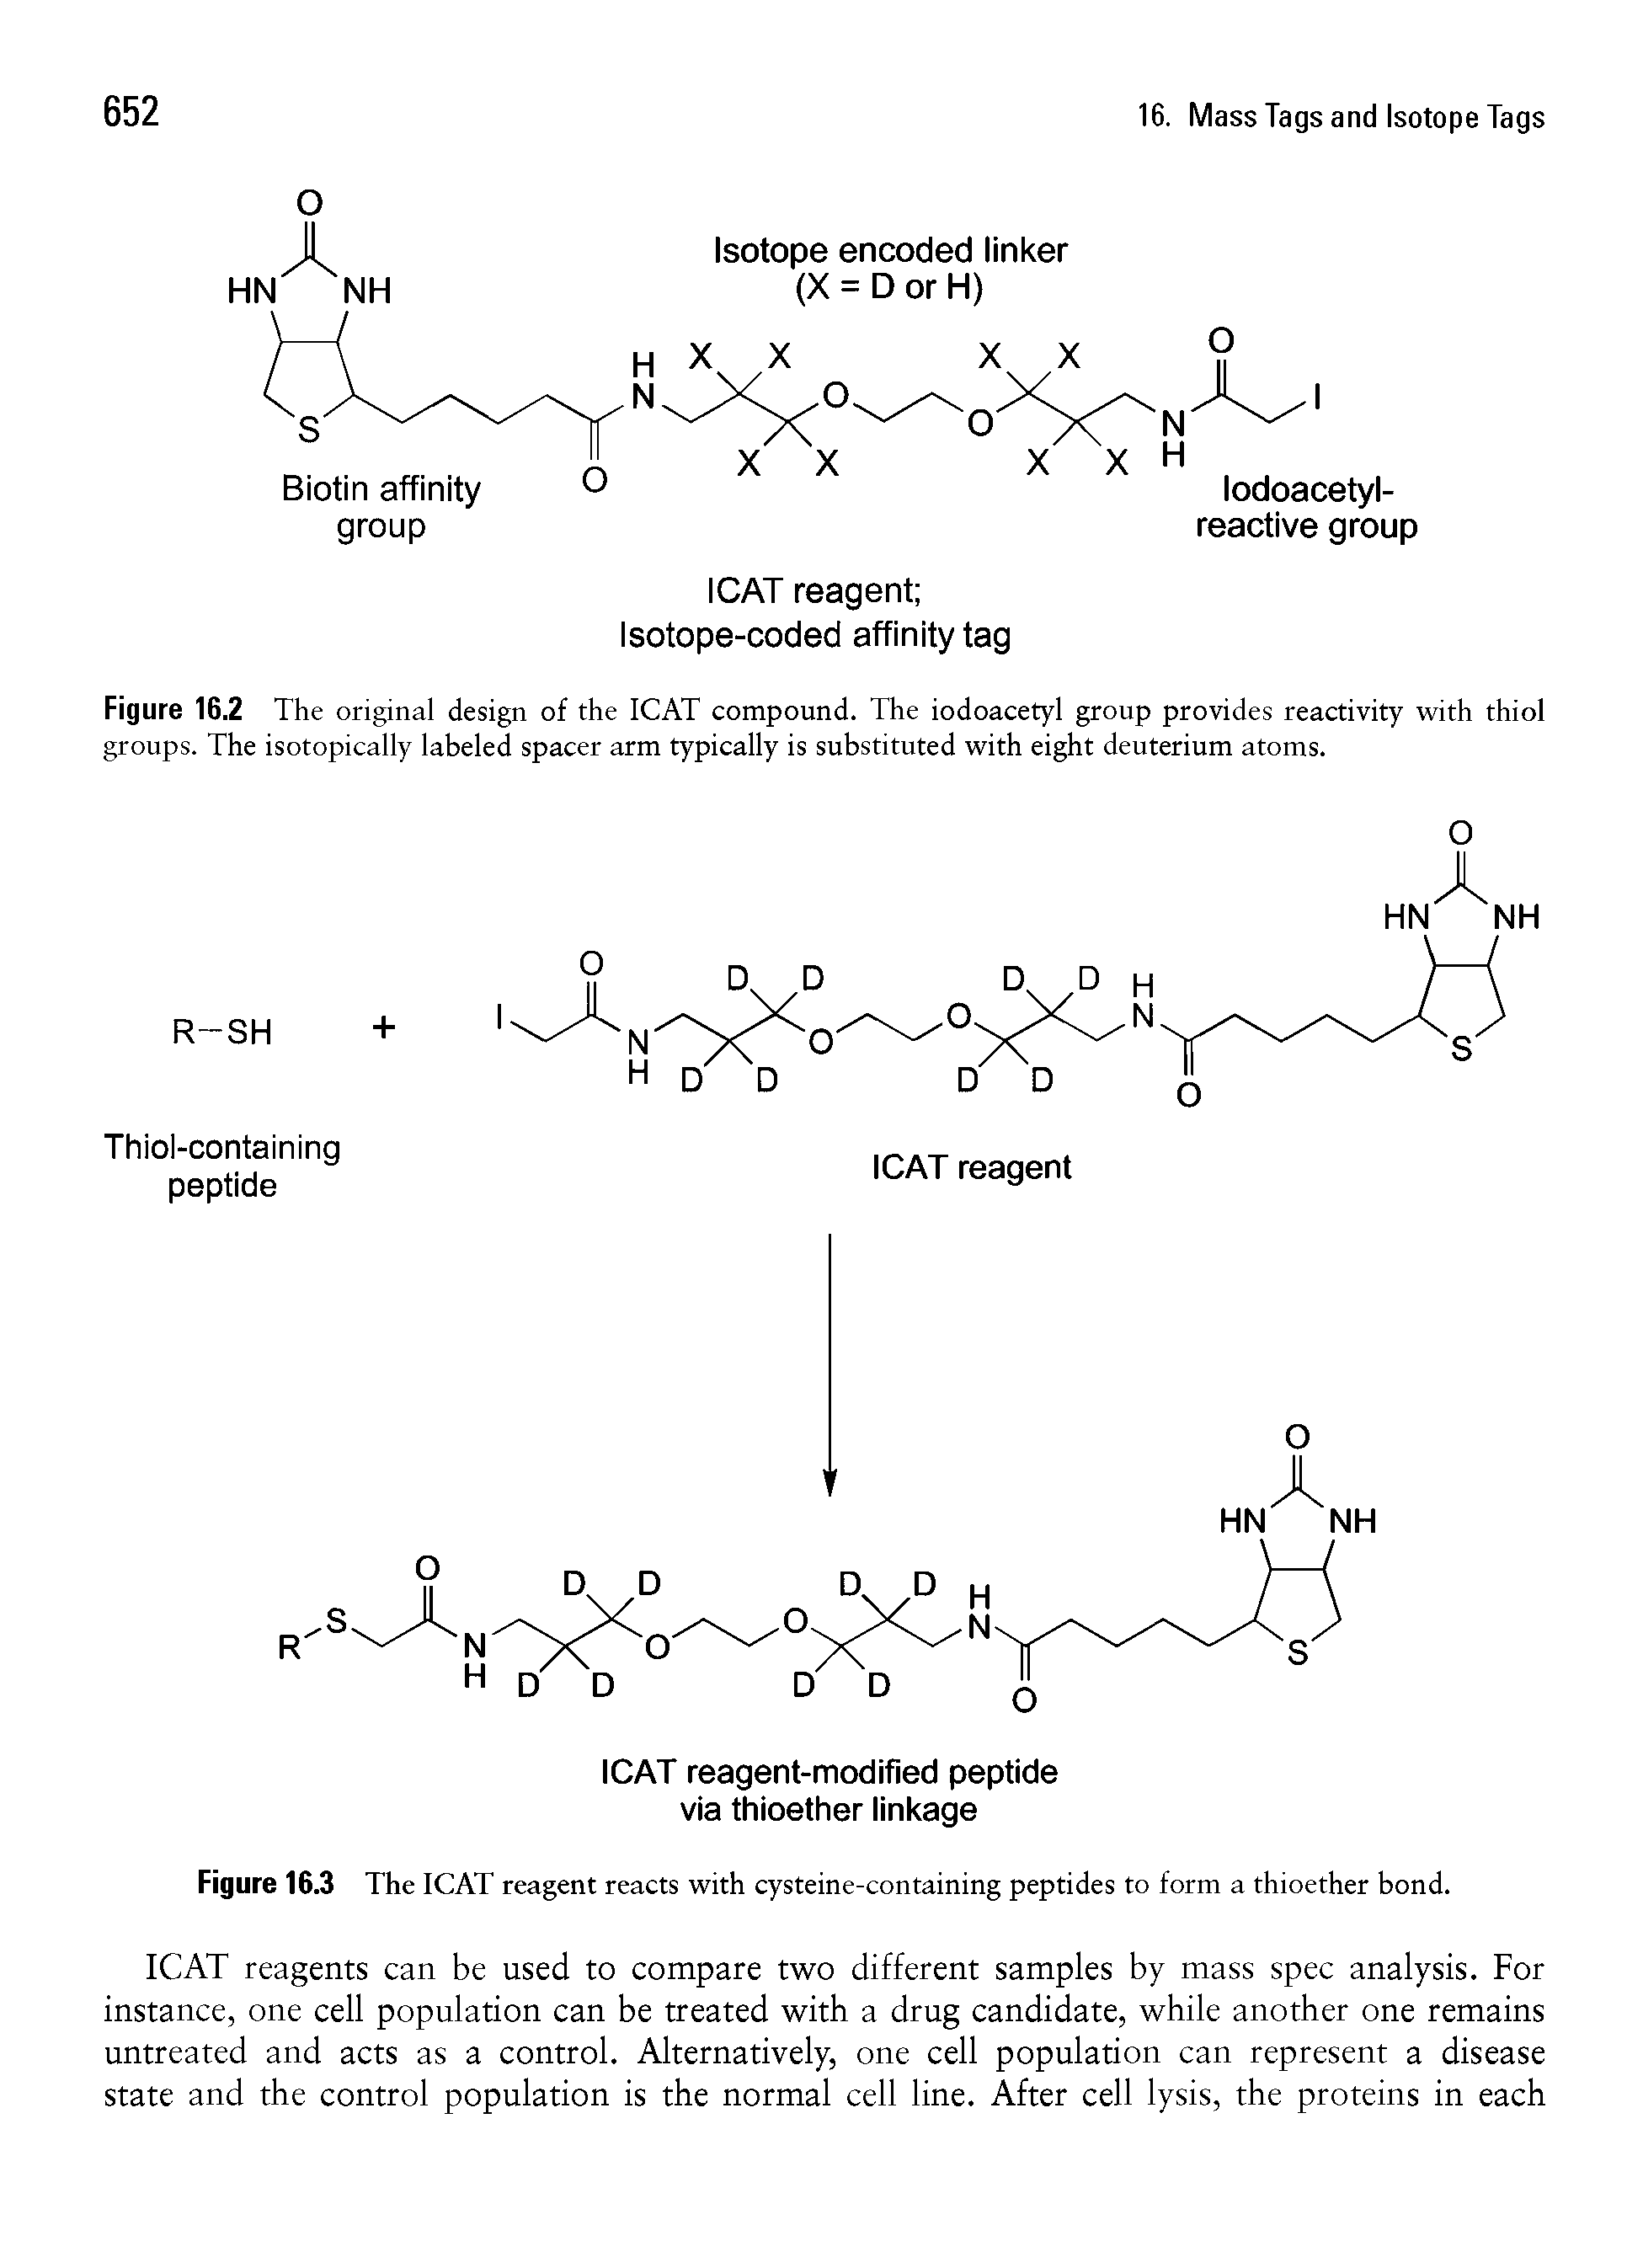 Figure 16.2 The original design of the ICAT compound. The iodoacetyl group provides reactivity with thiol groups. The isotopically labeled spacer arm typically is substituted with eight deuterium atoms.